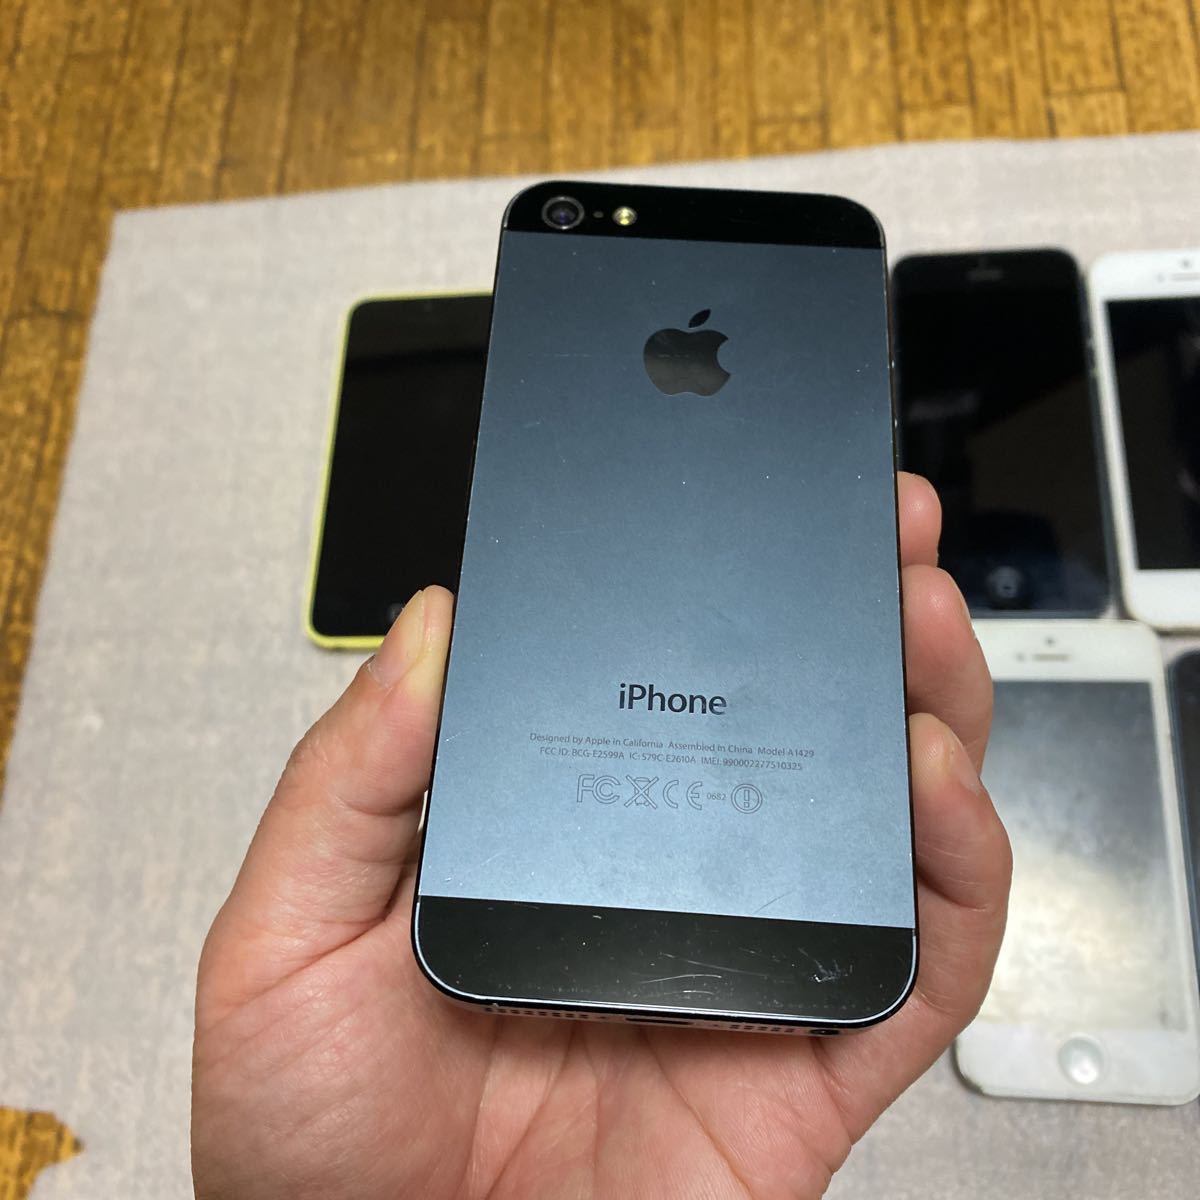 Apple iPhone 本体　iphone6 A1586, iphone SE A1723,A1429,A1453 等　大量　計10点 まとめて　まとめ　ジャンク品　①_画像5